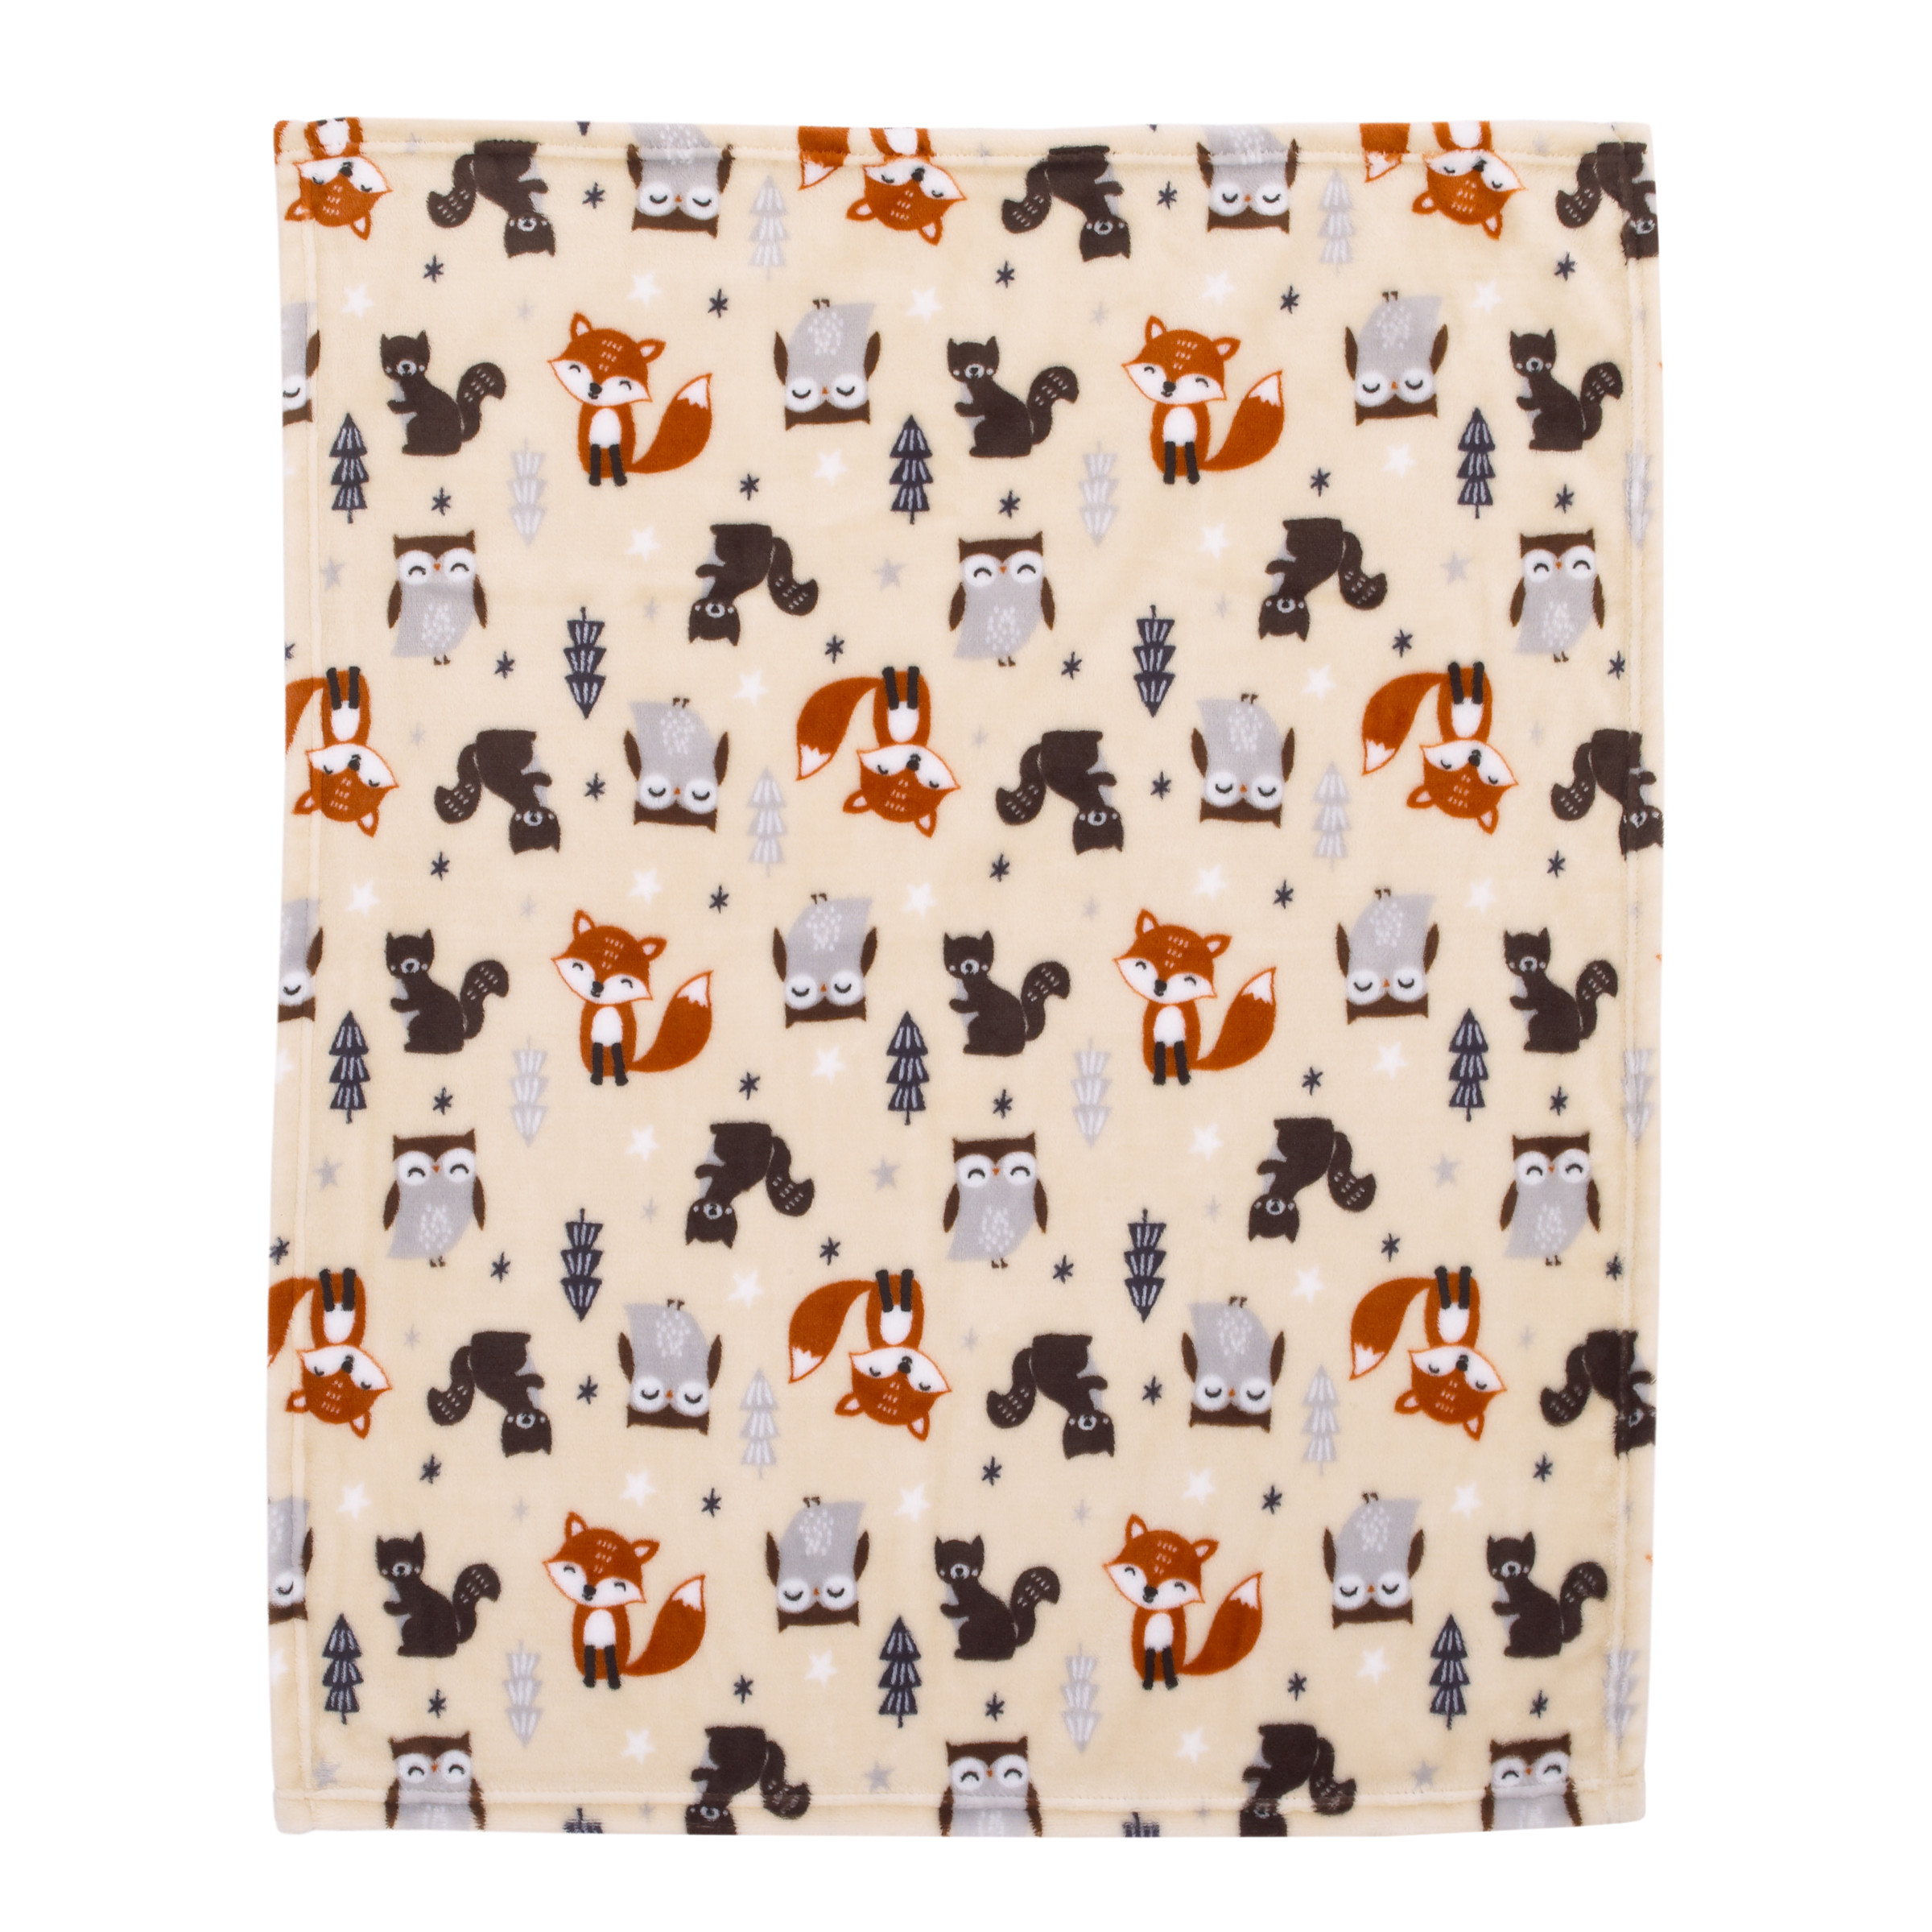 Parent's Choice Fox Woodland Baby Blanket, 30x36 inches - image 2 of 6